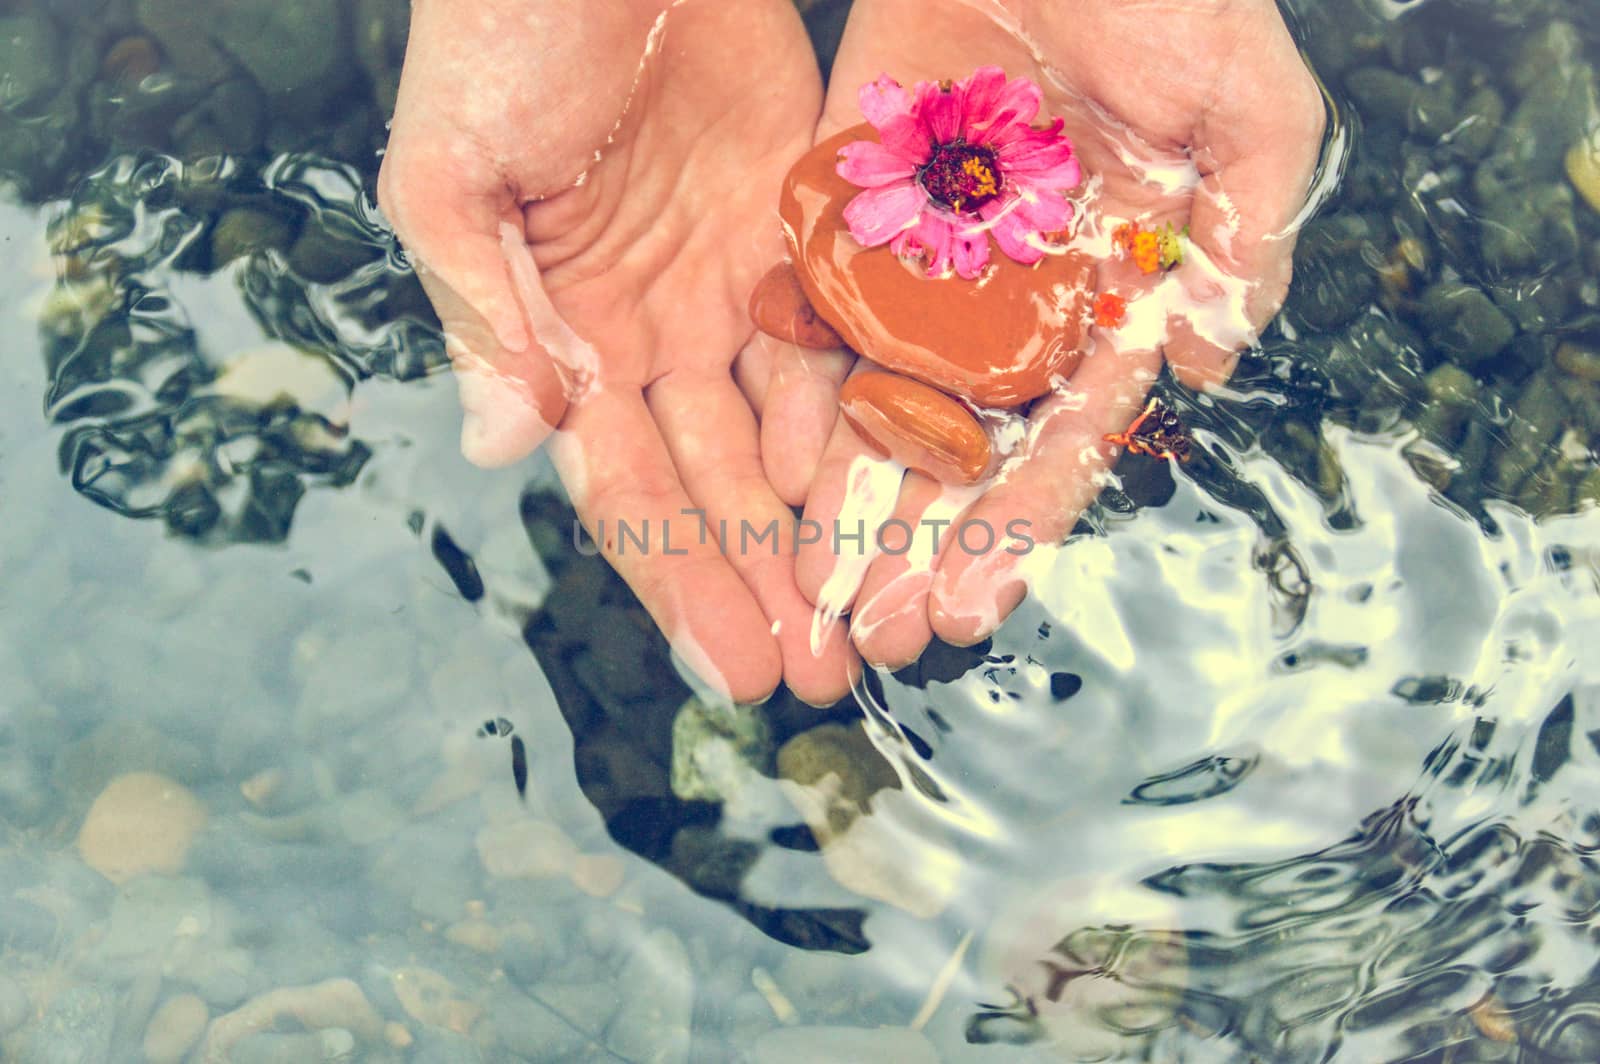 Top view of male hands holding flowers and pebbles over clean clear water showing the concept of healing, new age movement, wellness and mental health